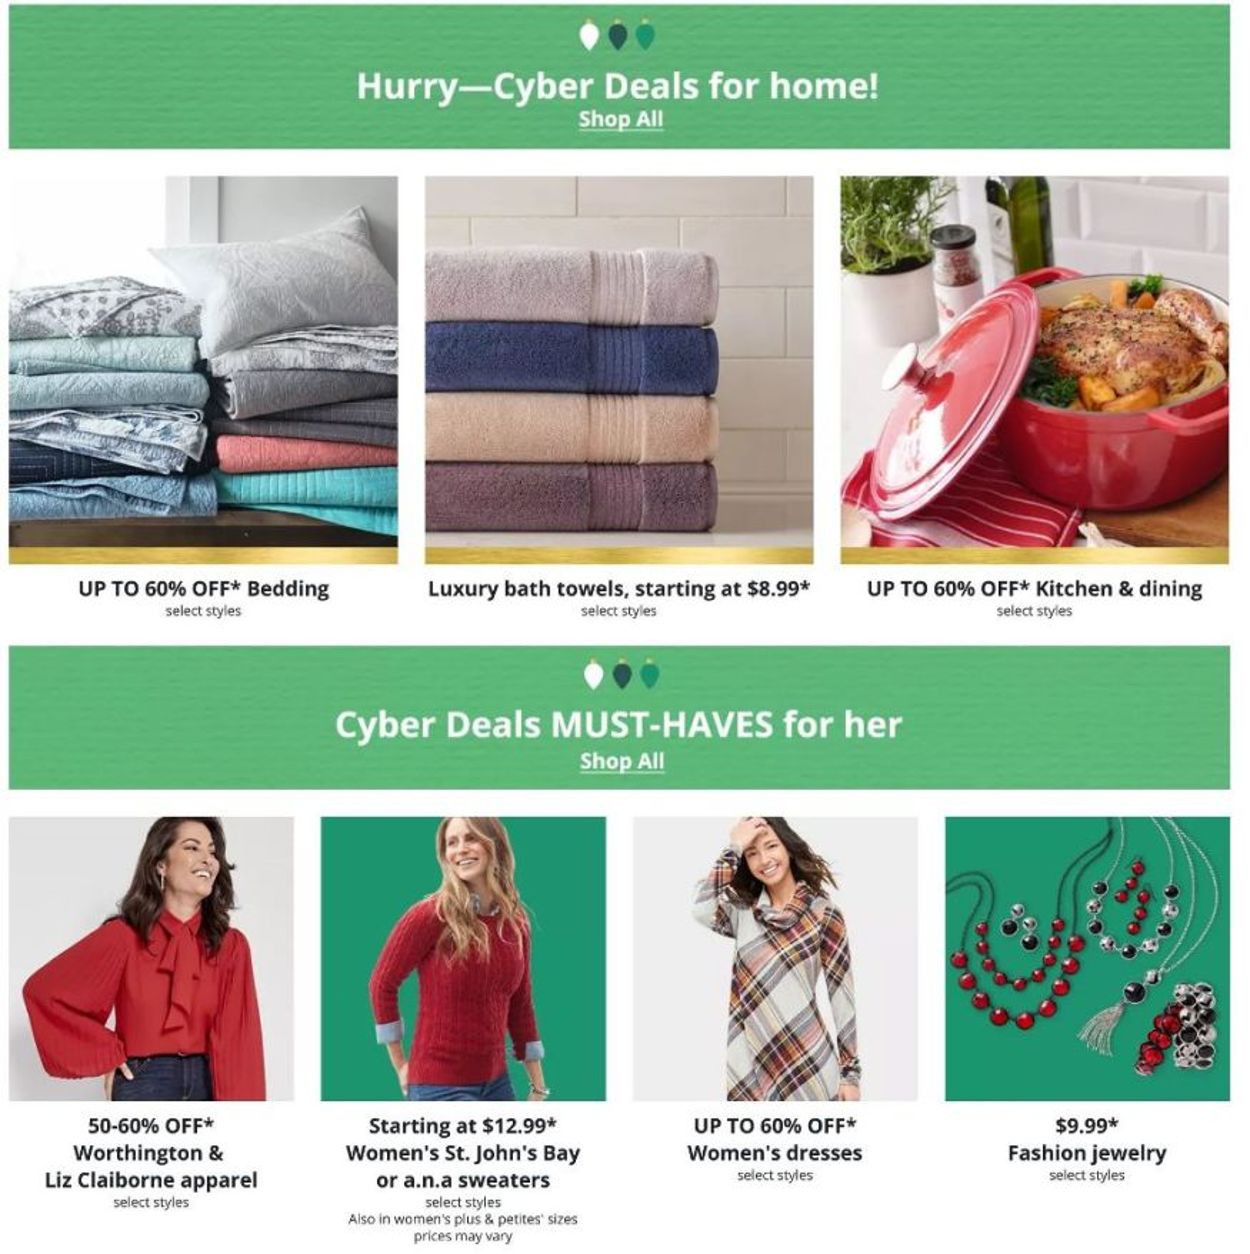 JCPenney Cyber Monday 2020 Current ad 25.11 31.12.2020 [2] black